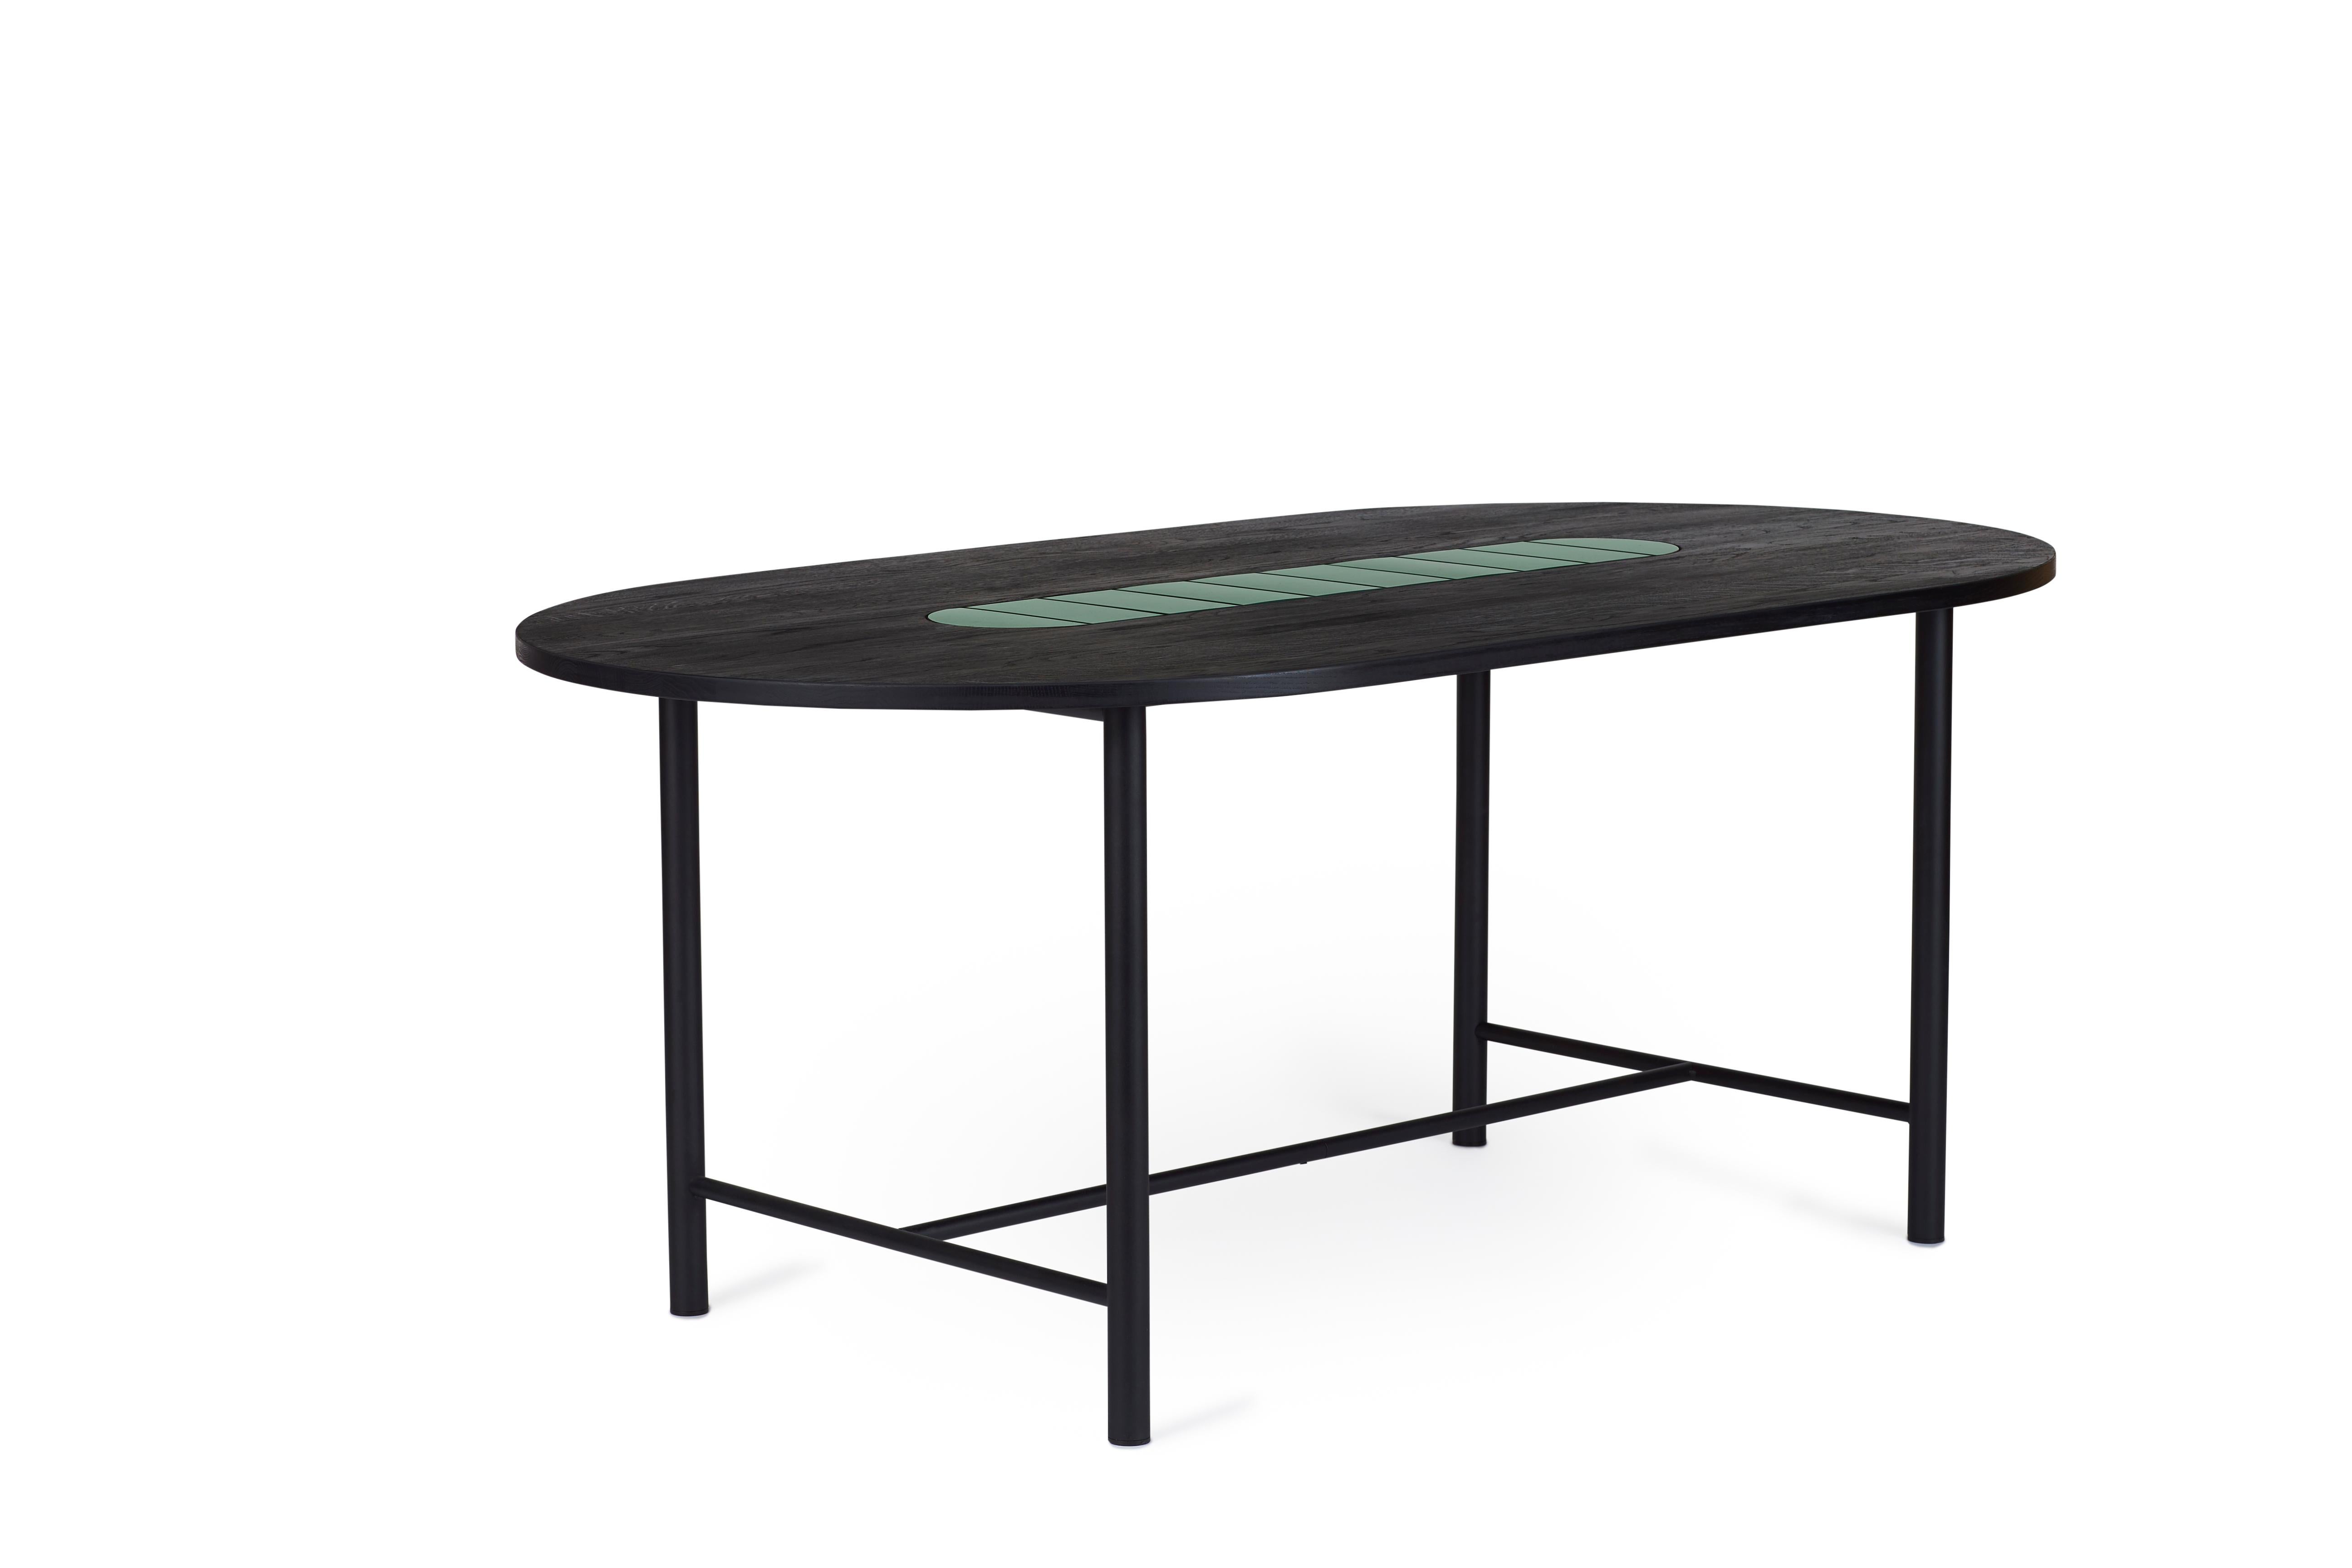 For Sale: Green (Forest green) Be My Guest Small Dining Table, by Charlotte Høncke from Warm Nordic 2